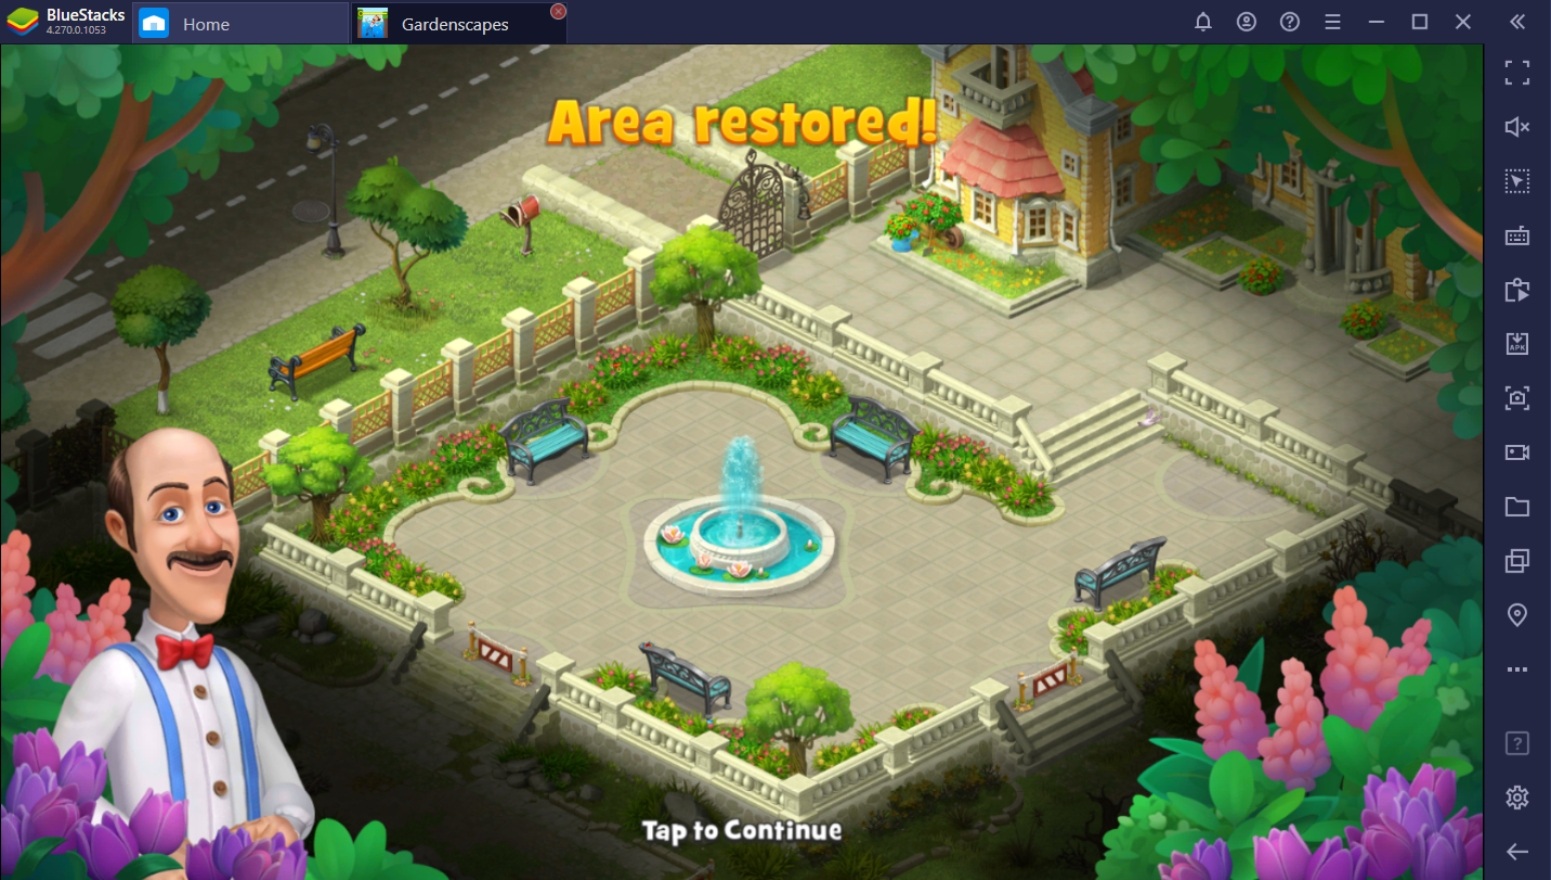 Tips & Tricks To Play Better At Gardenscapes